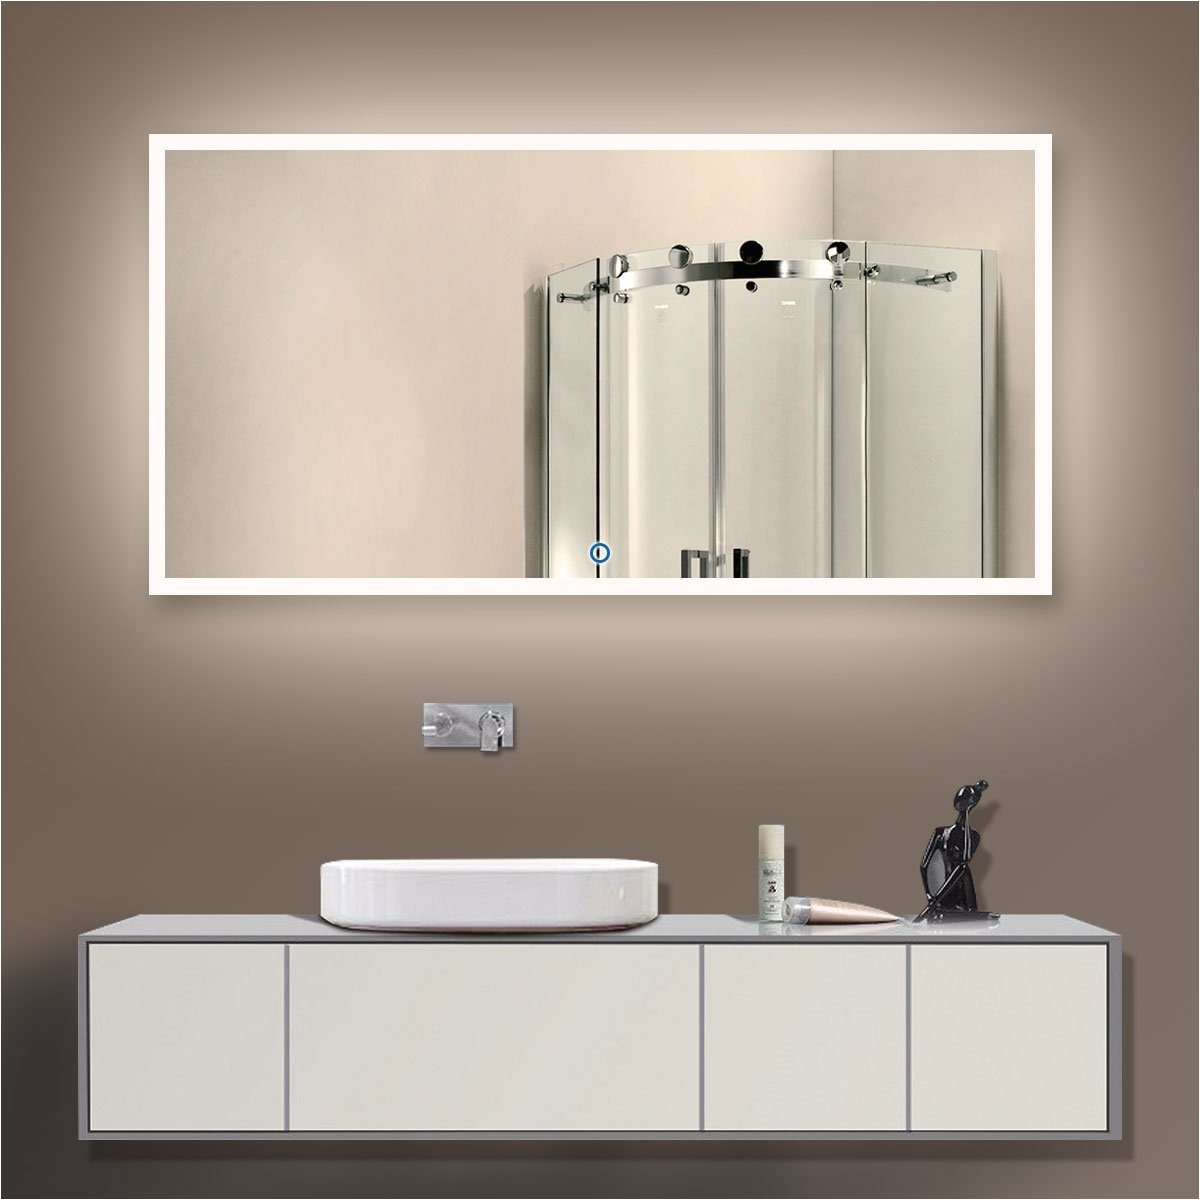 amazon com decoraport 55 inch 28 inch horizontal led wall mounted lighted vanity bathroom silvered mirror with touch button a n031 d home kitchen